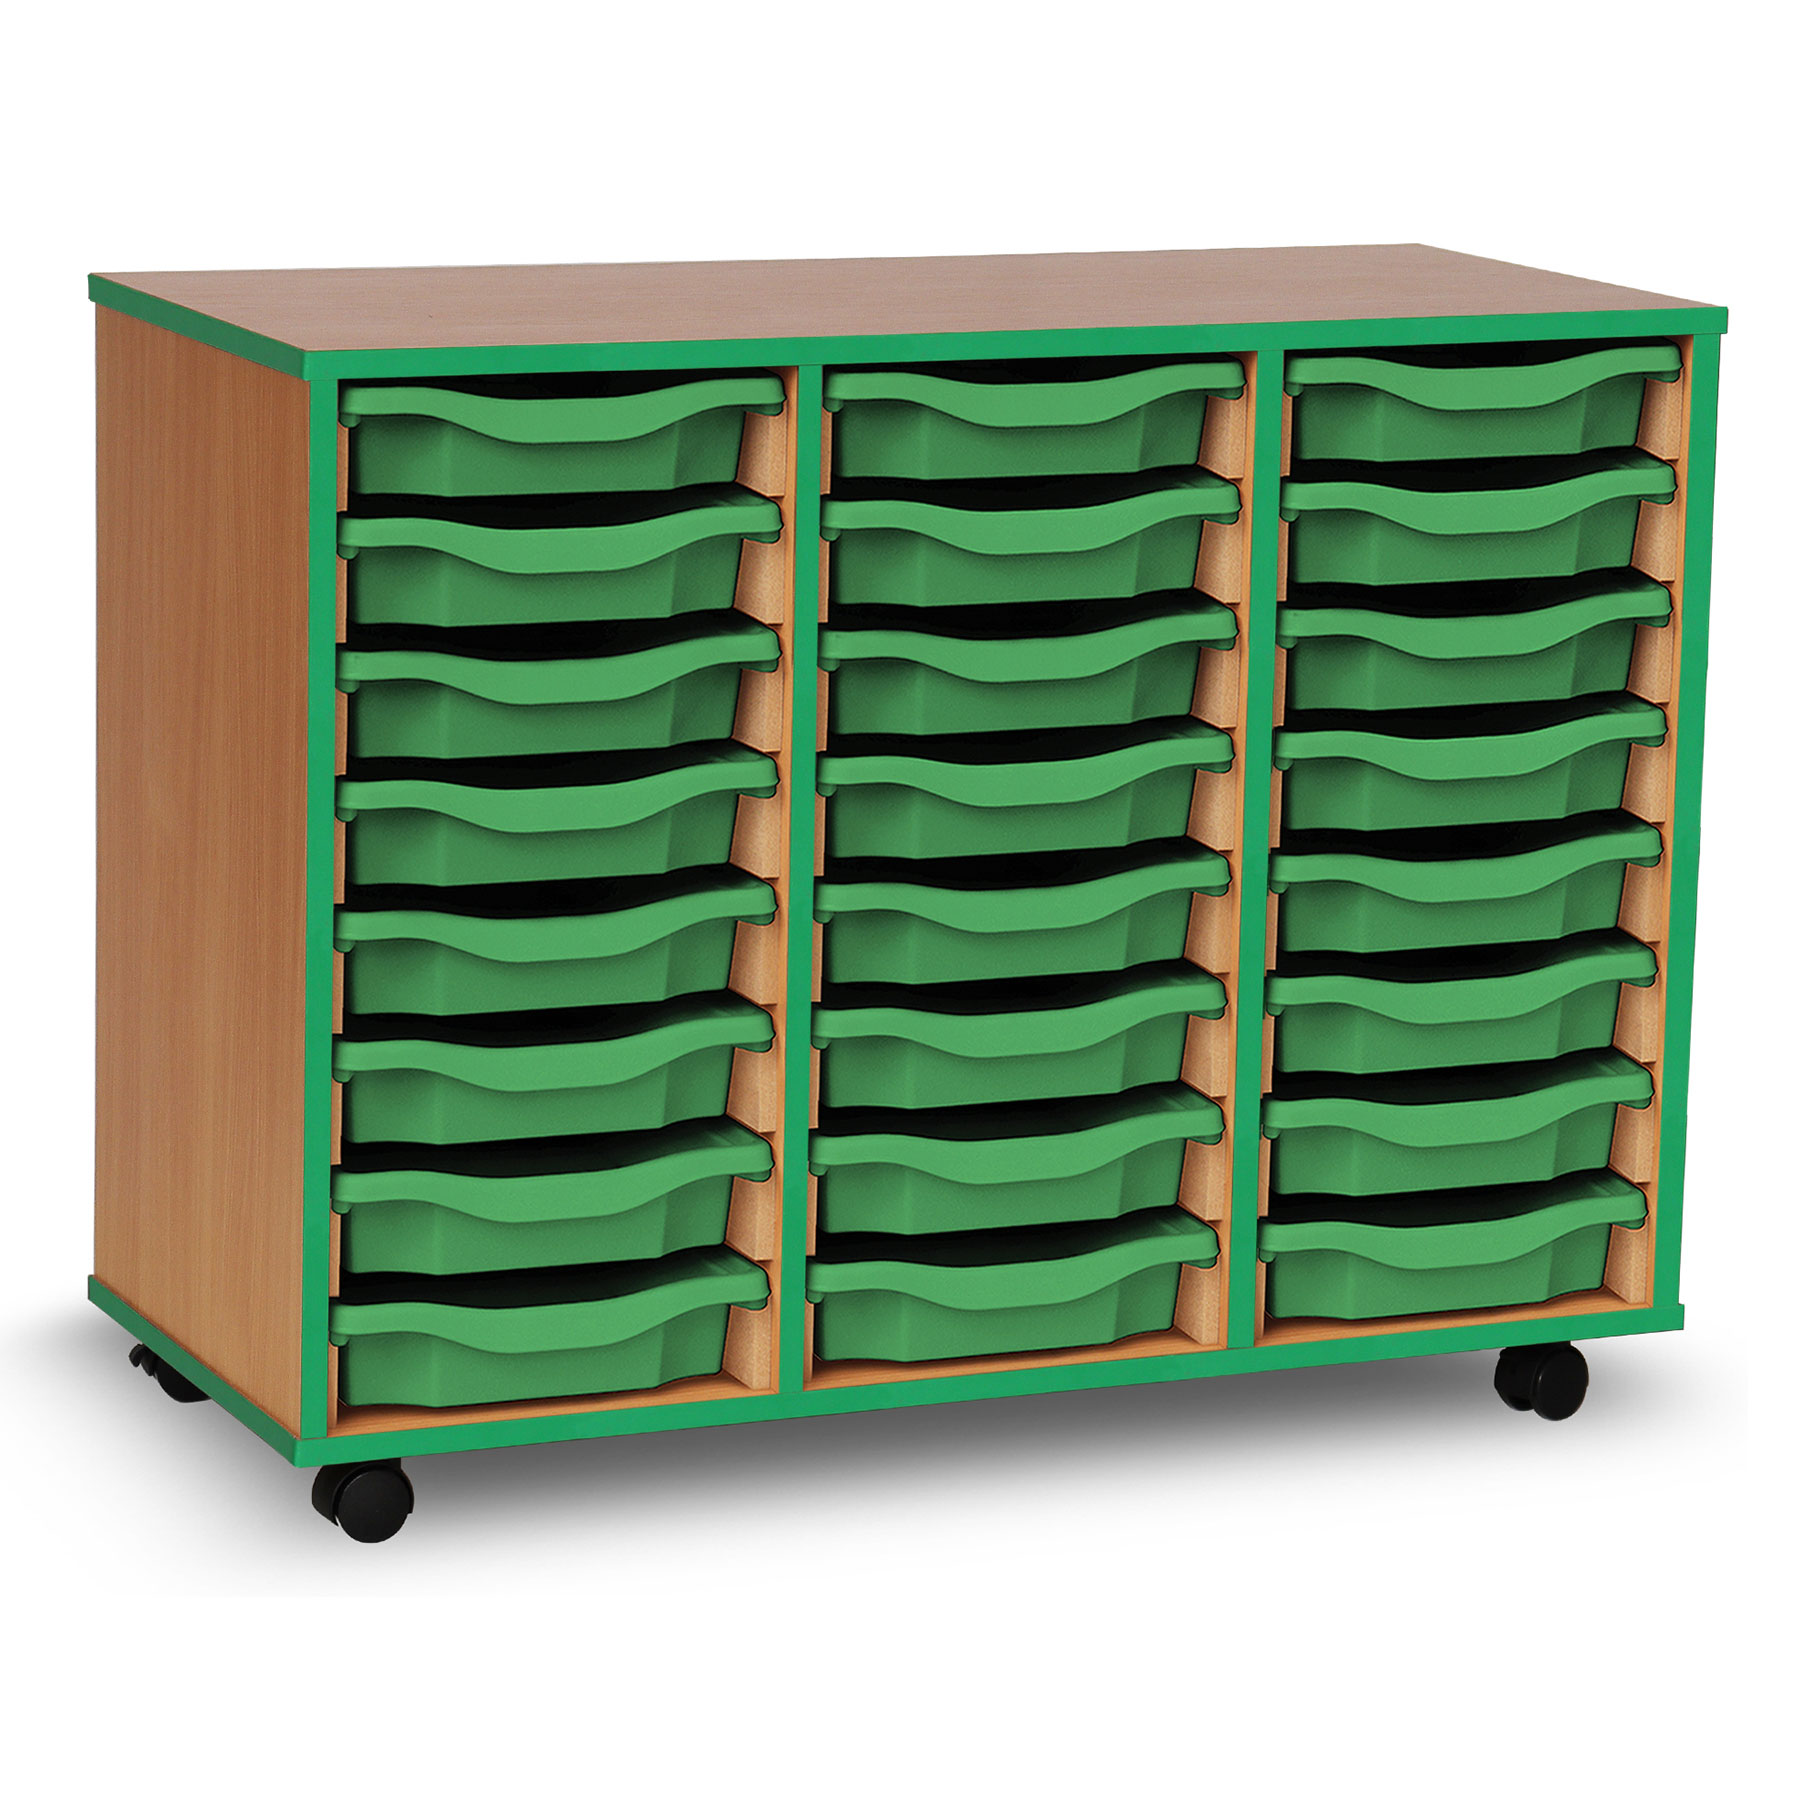 24 Single Tray Unit with Green Edging, Castors & Green Trays